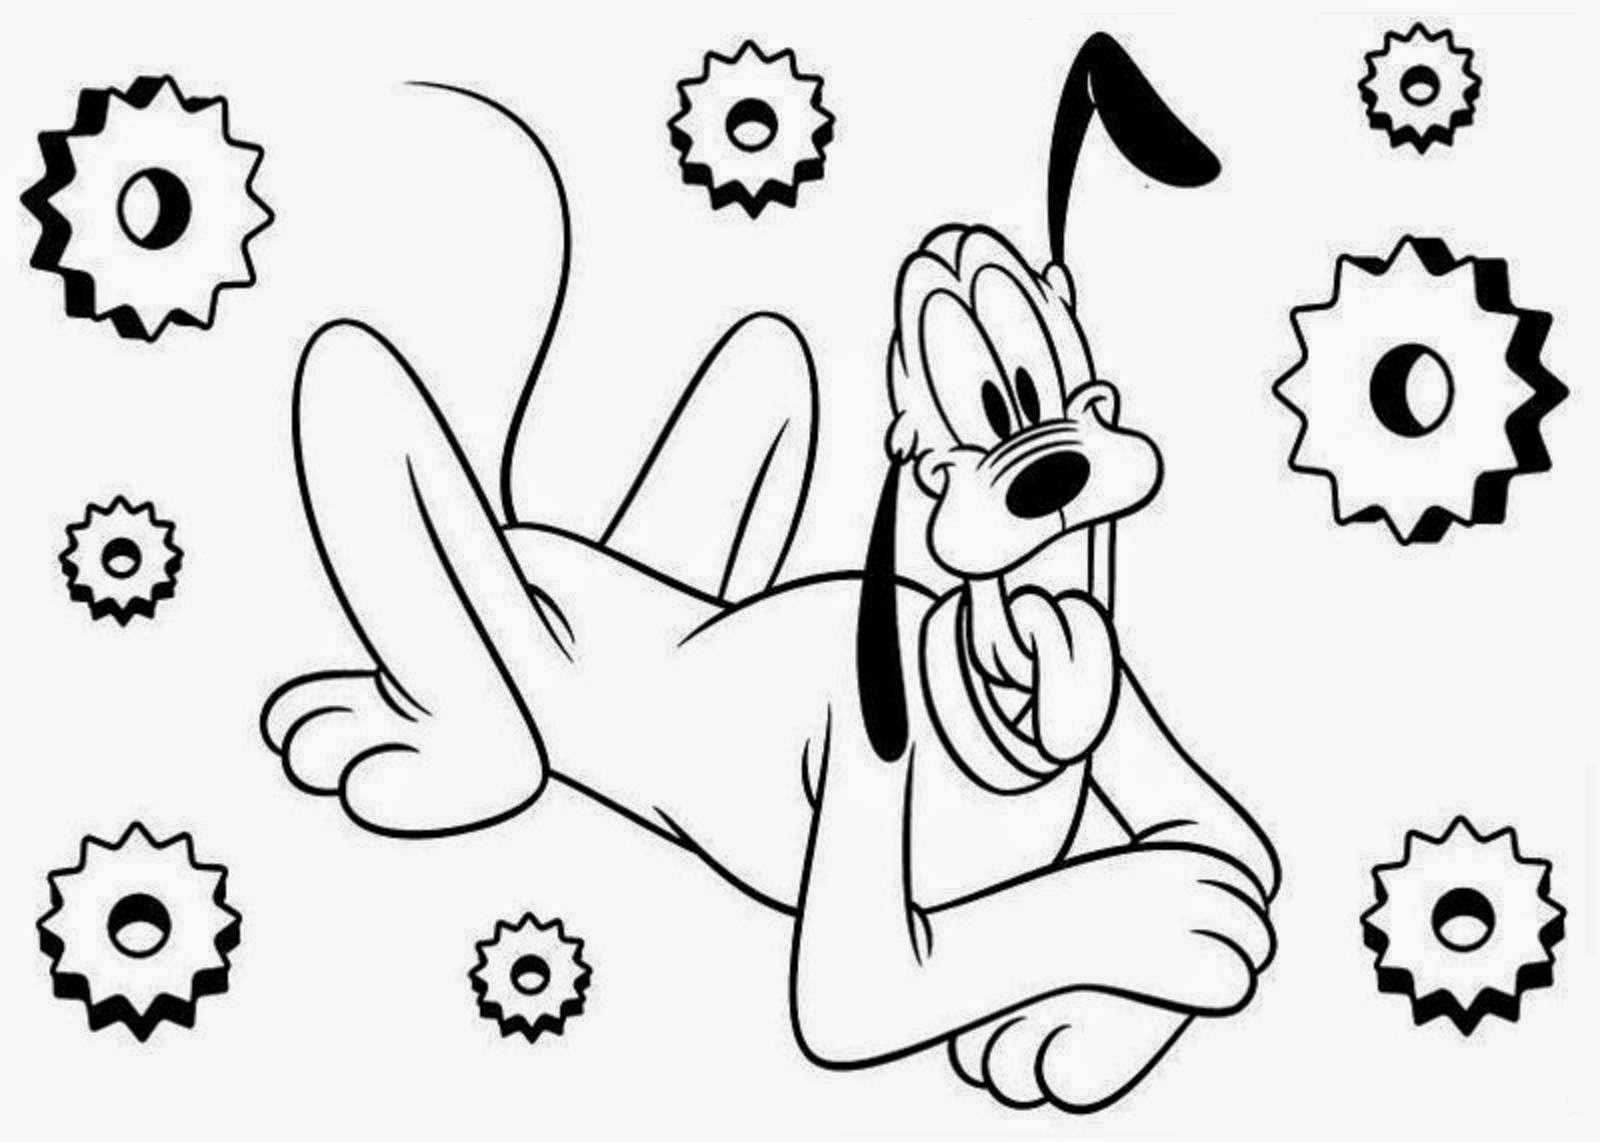 Disney Cartoon Pluto For Kid Coloring Page Free wallpaper